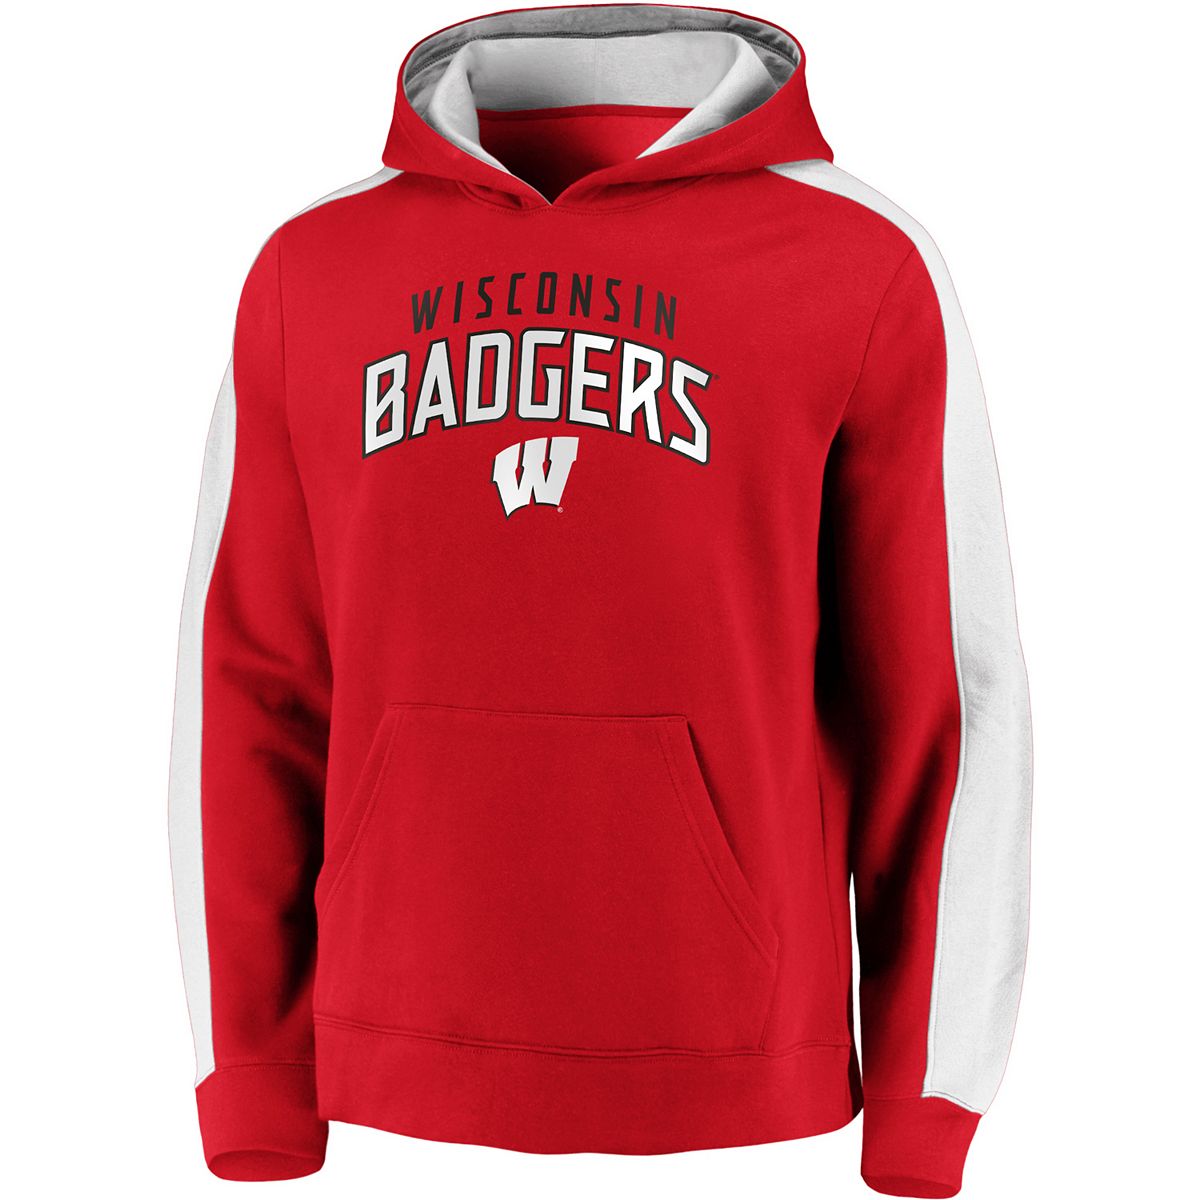 Kohl’s: Save up to 90% on NCAA Apparel as low as $4.00